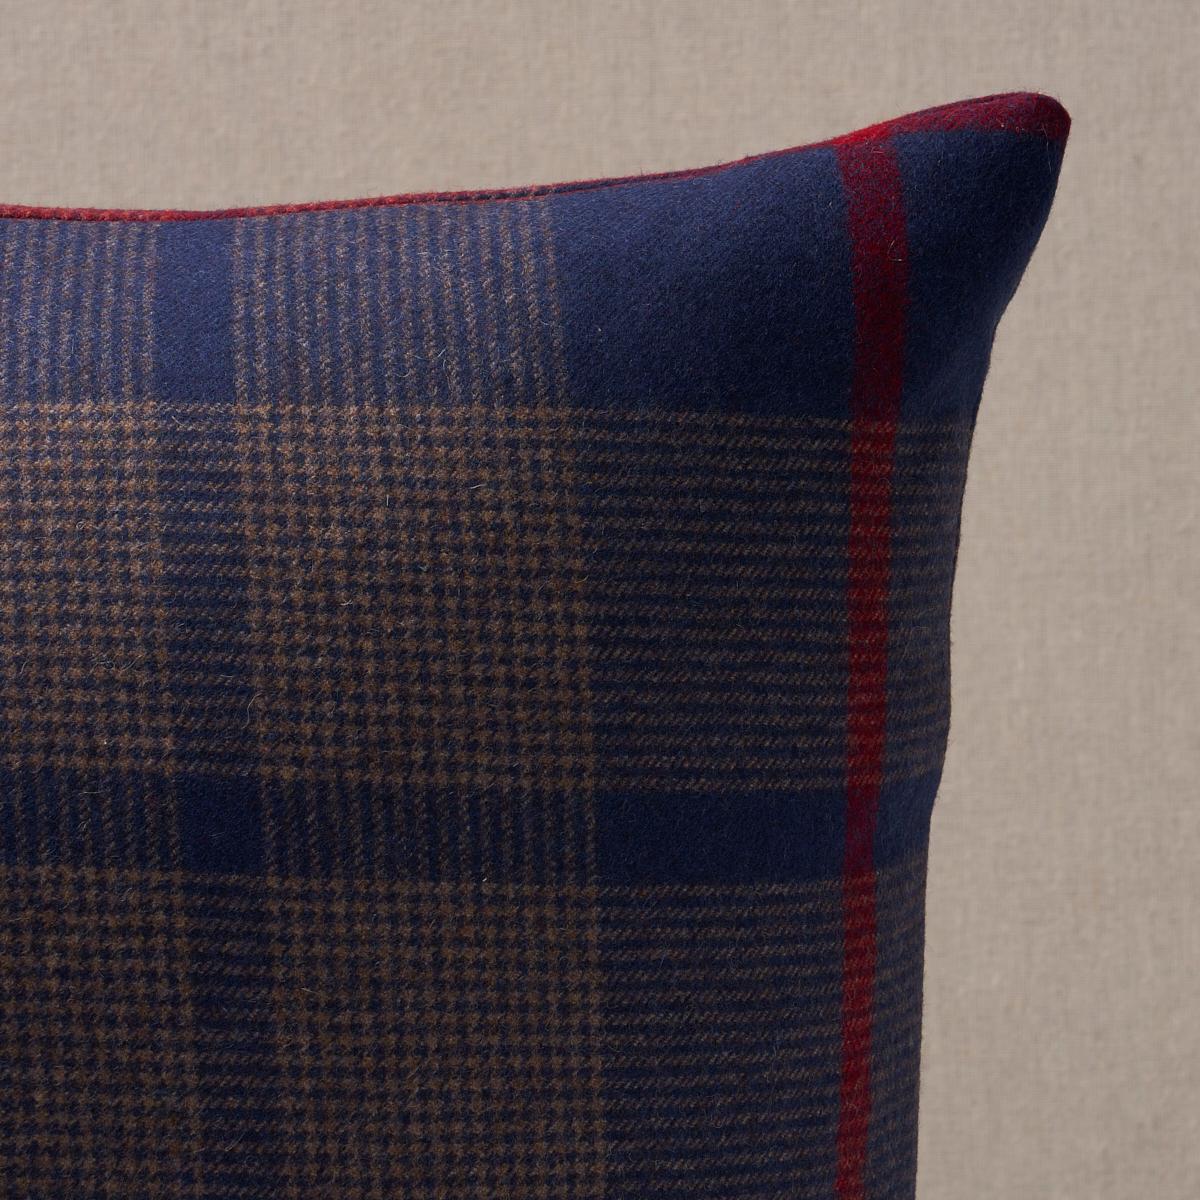 This pillow features Montana Wool Plaid with a knife edge finish. Montana Wool Plaid in navy is a fine, tightly woven houndstooth check with an overstripe that adds lovely depth and a touch of contrast. Pillow includes a feather/down fill insert and